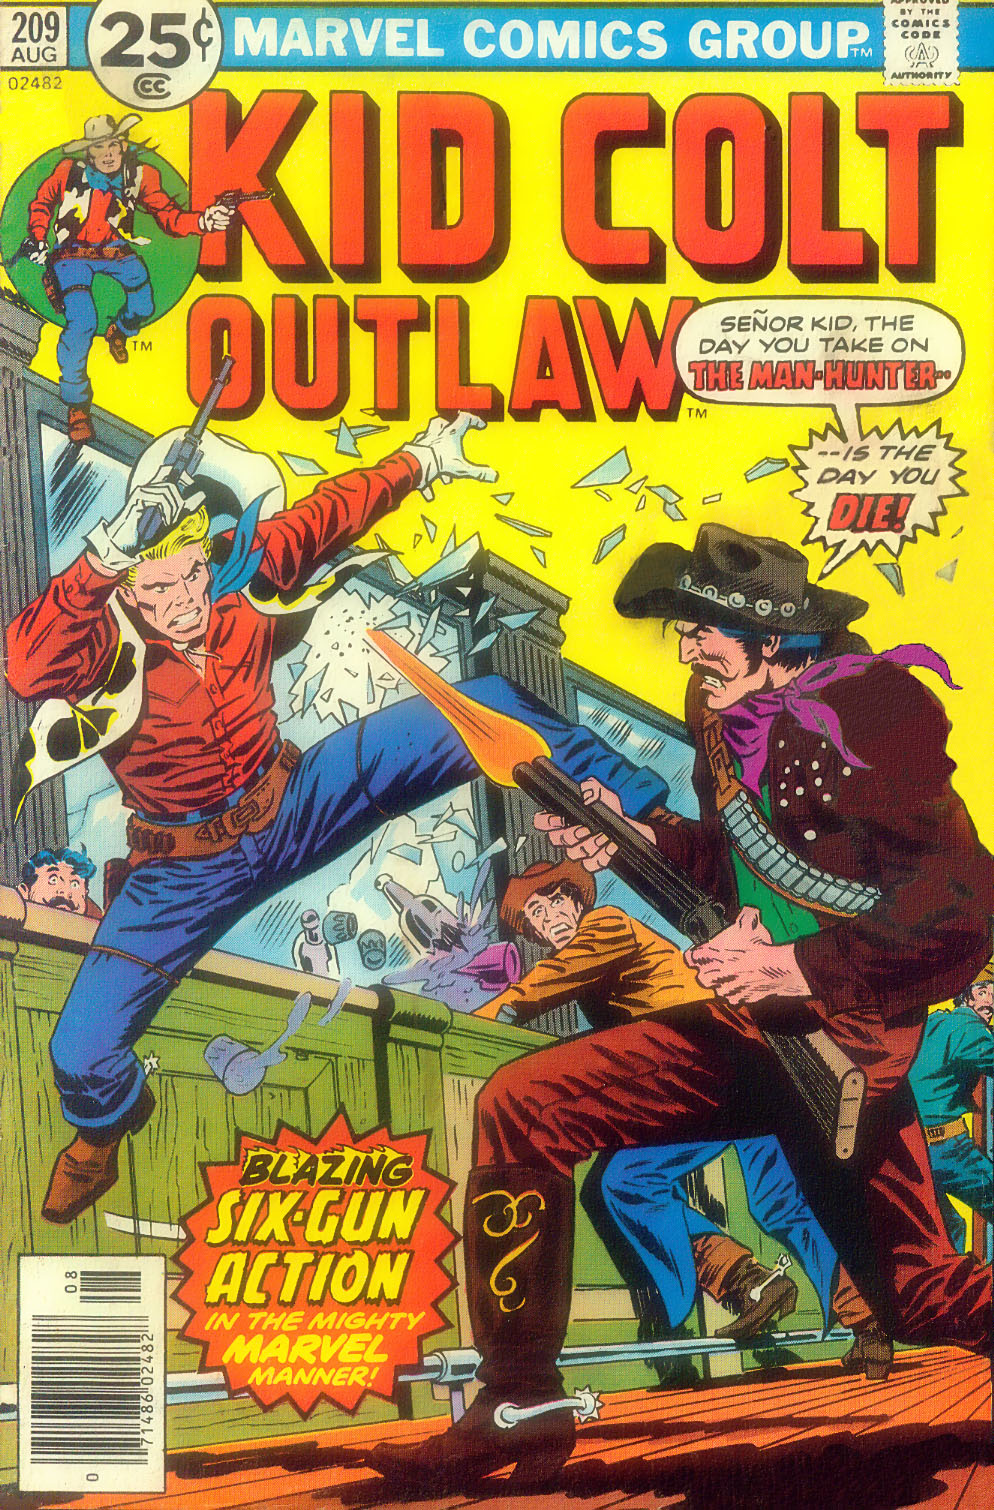 Read online Kid Colt Outlaw comic -  Issue #209 - 1